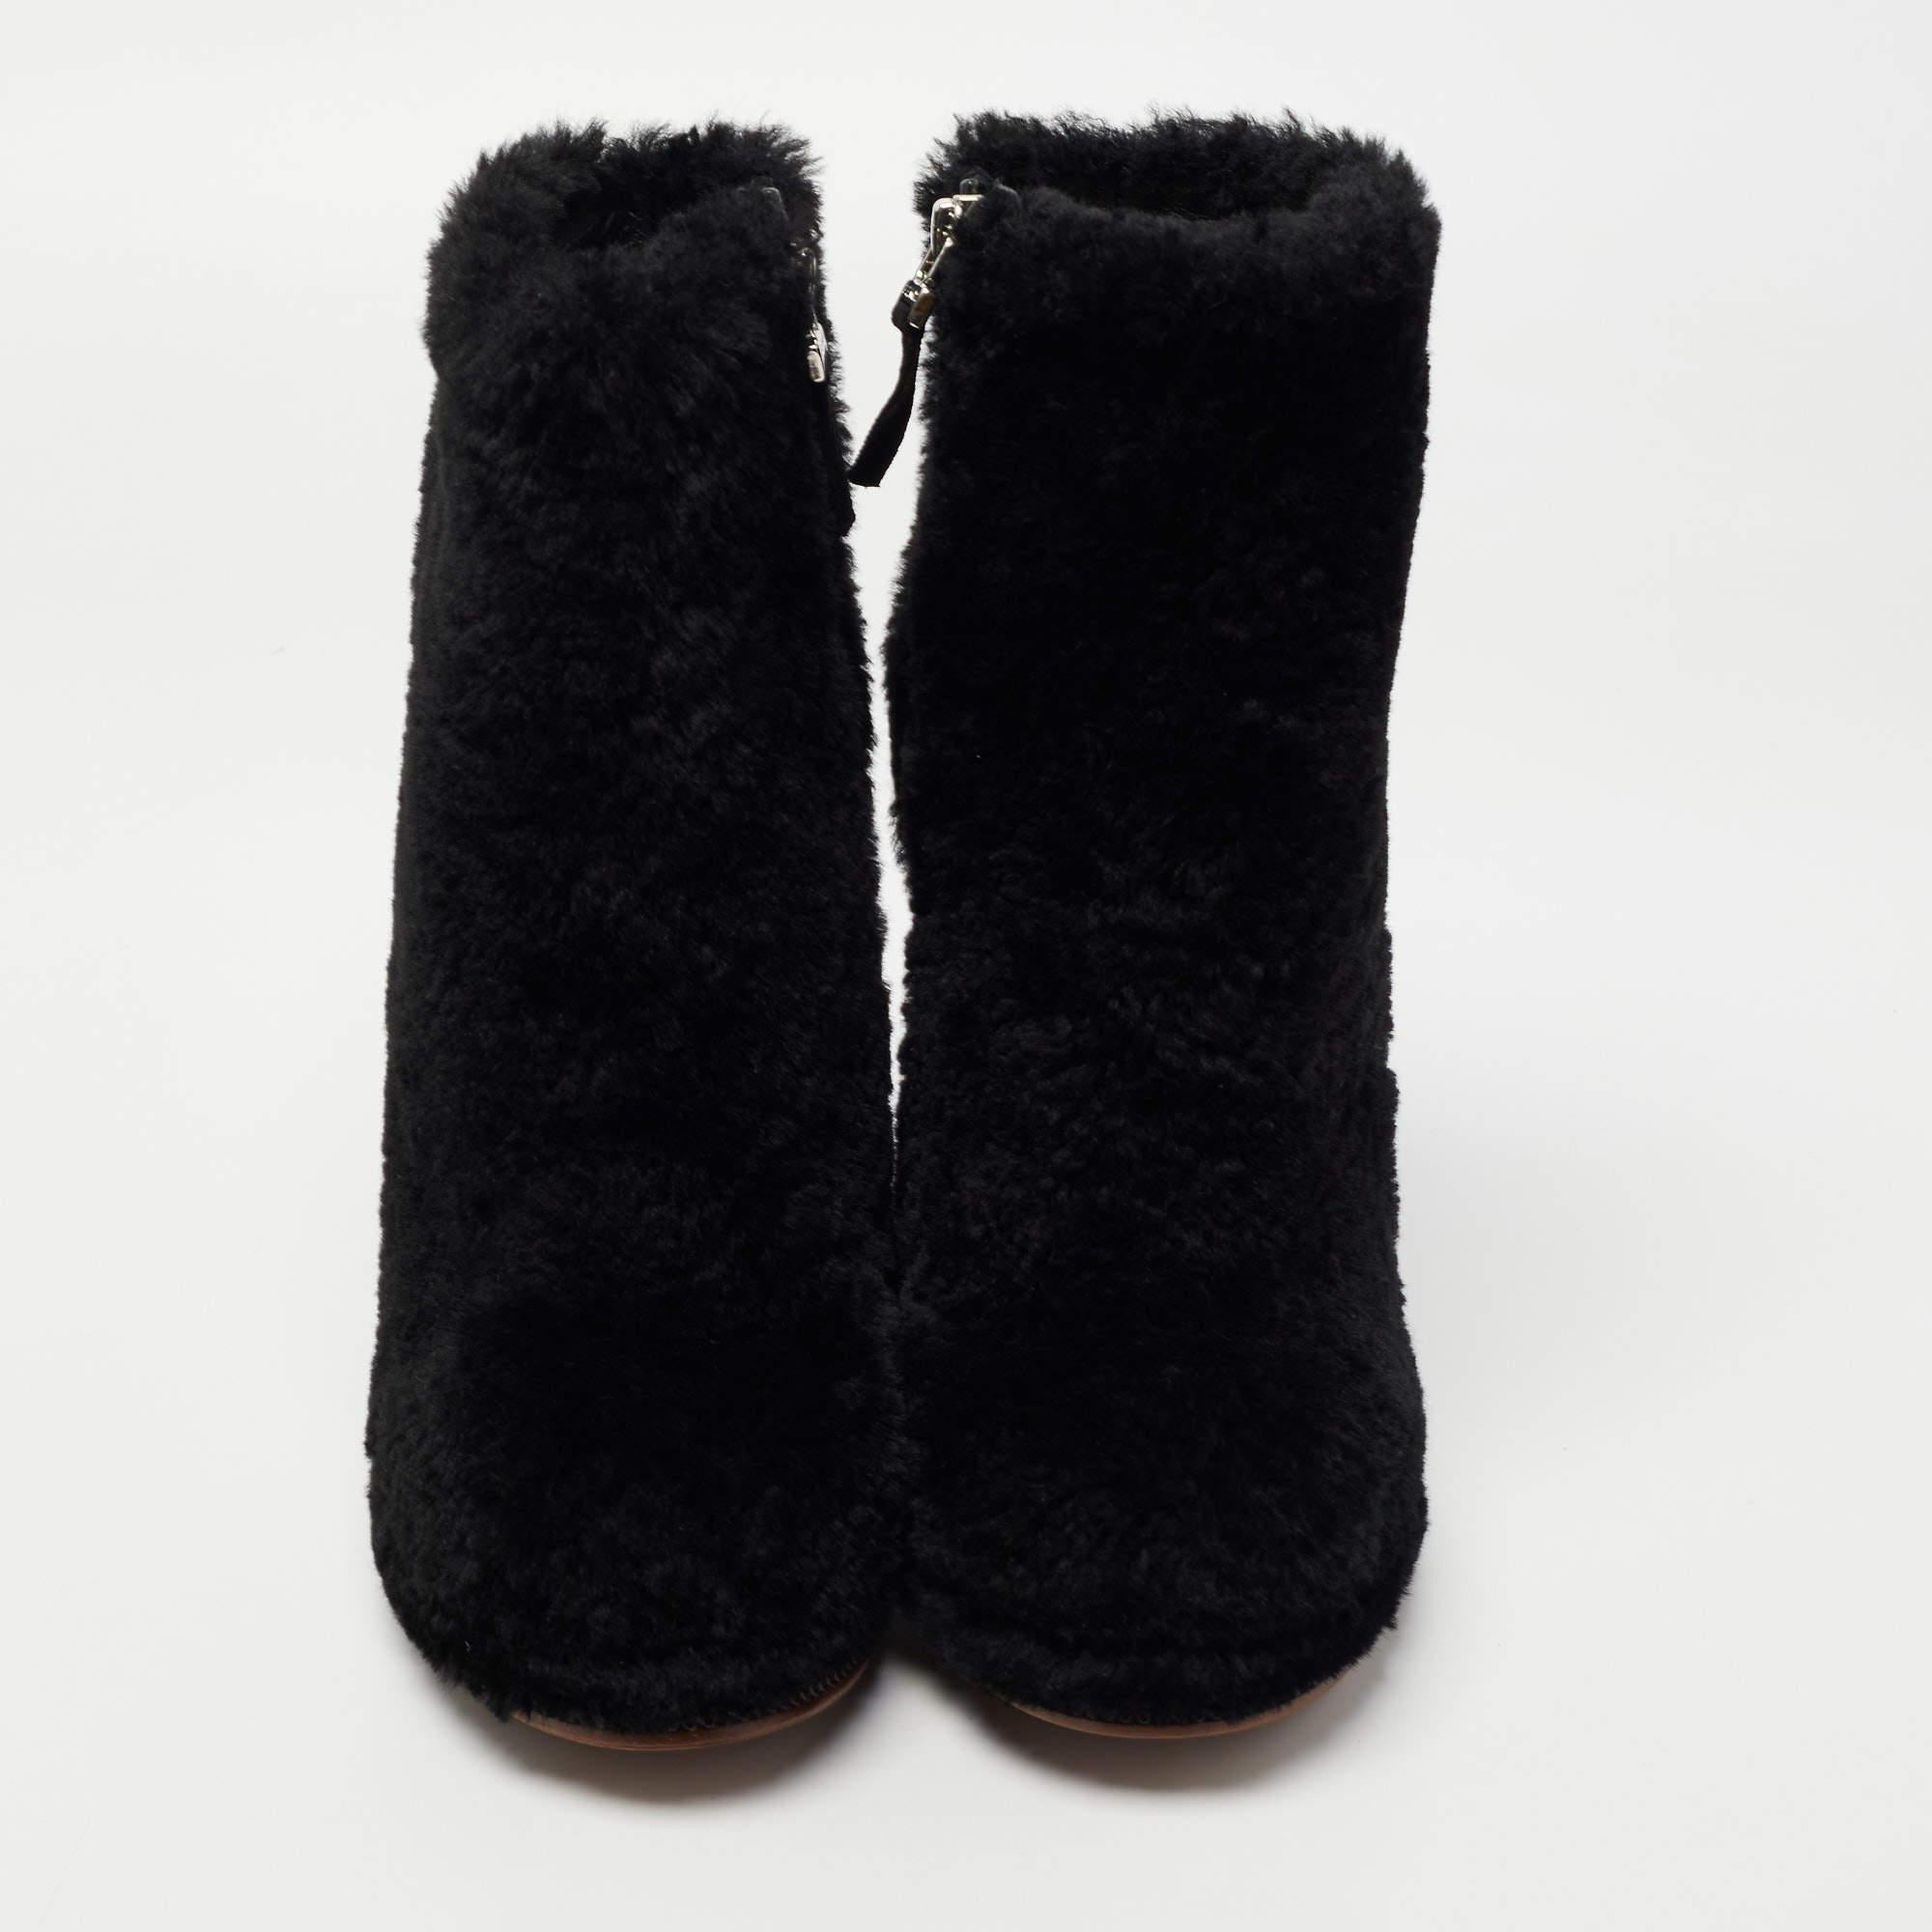 Fendi is all set to impress you with this stunning pair of boots. Crafted from shearling fur in a black shade, they feature sturdy heels. This pair of boots will raise your style factor.

Includes: Original Dustbag, Original Box, Info Booklet

